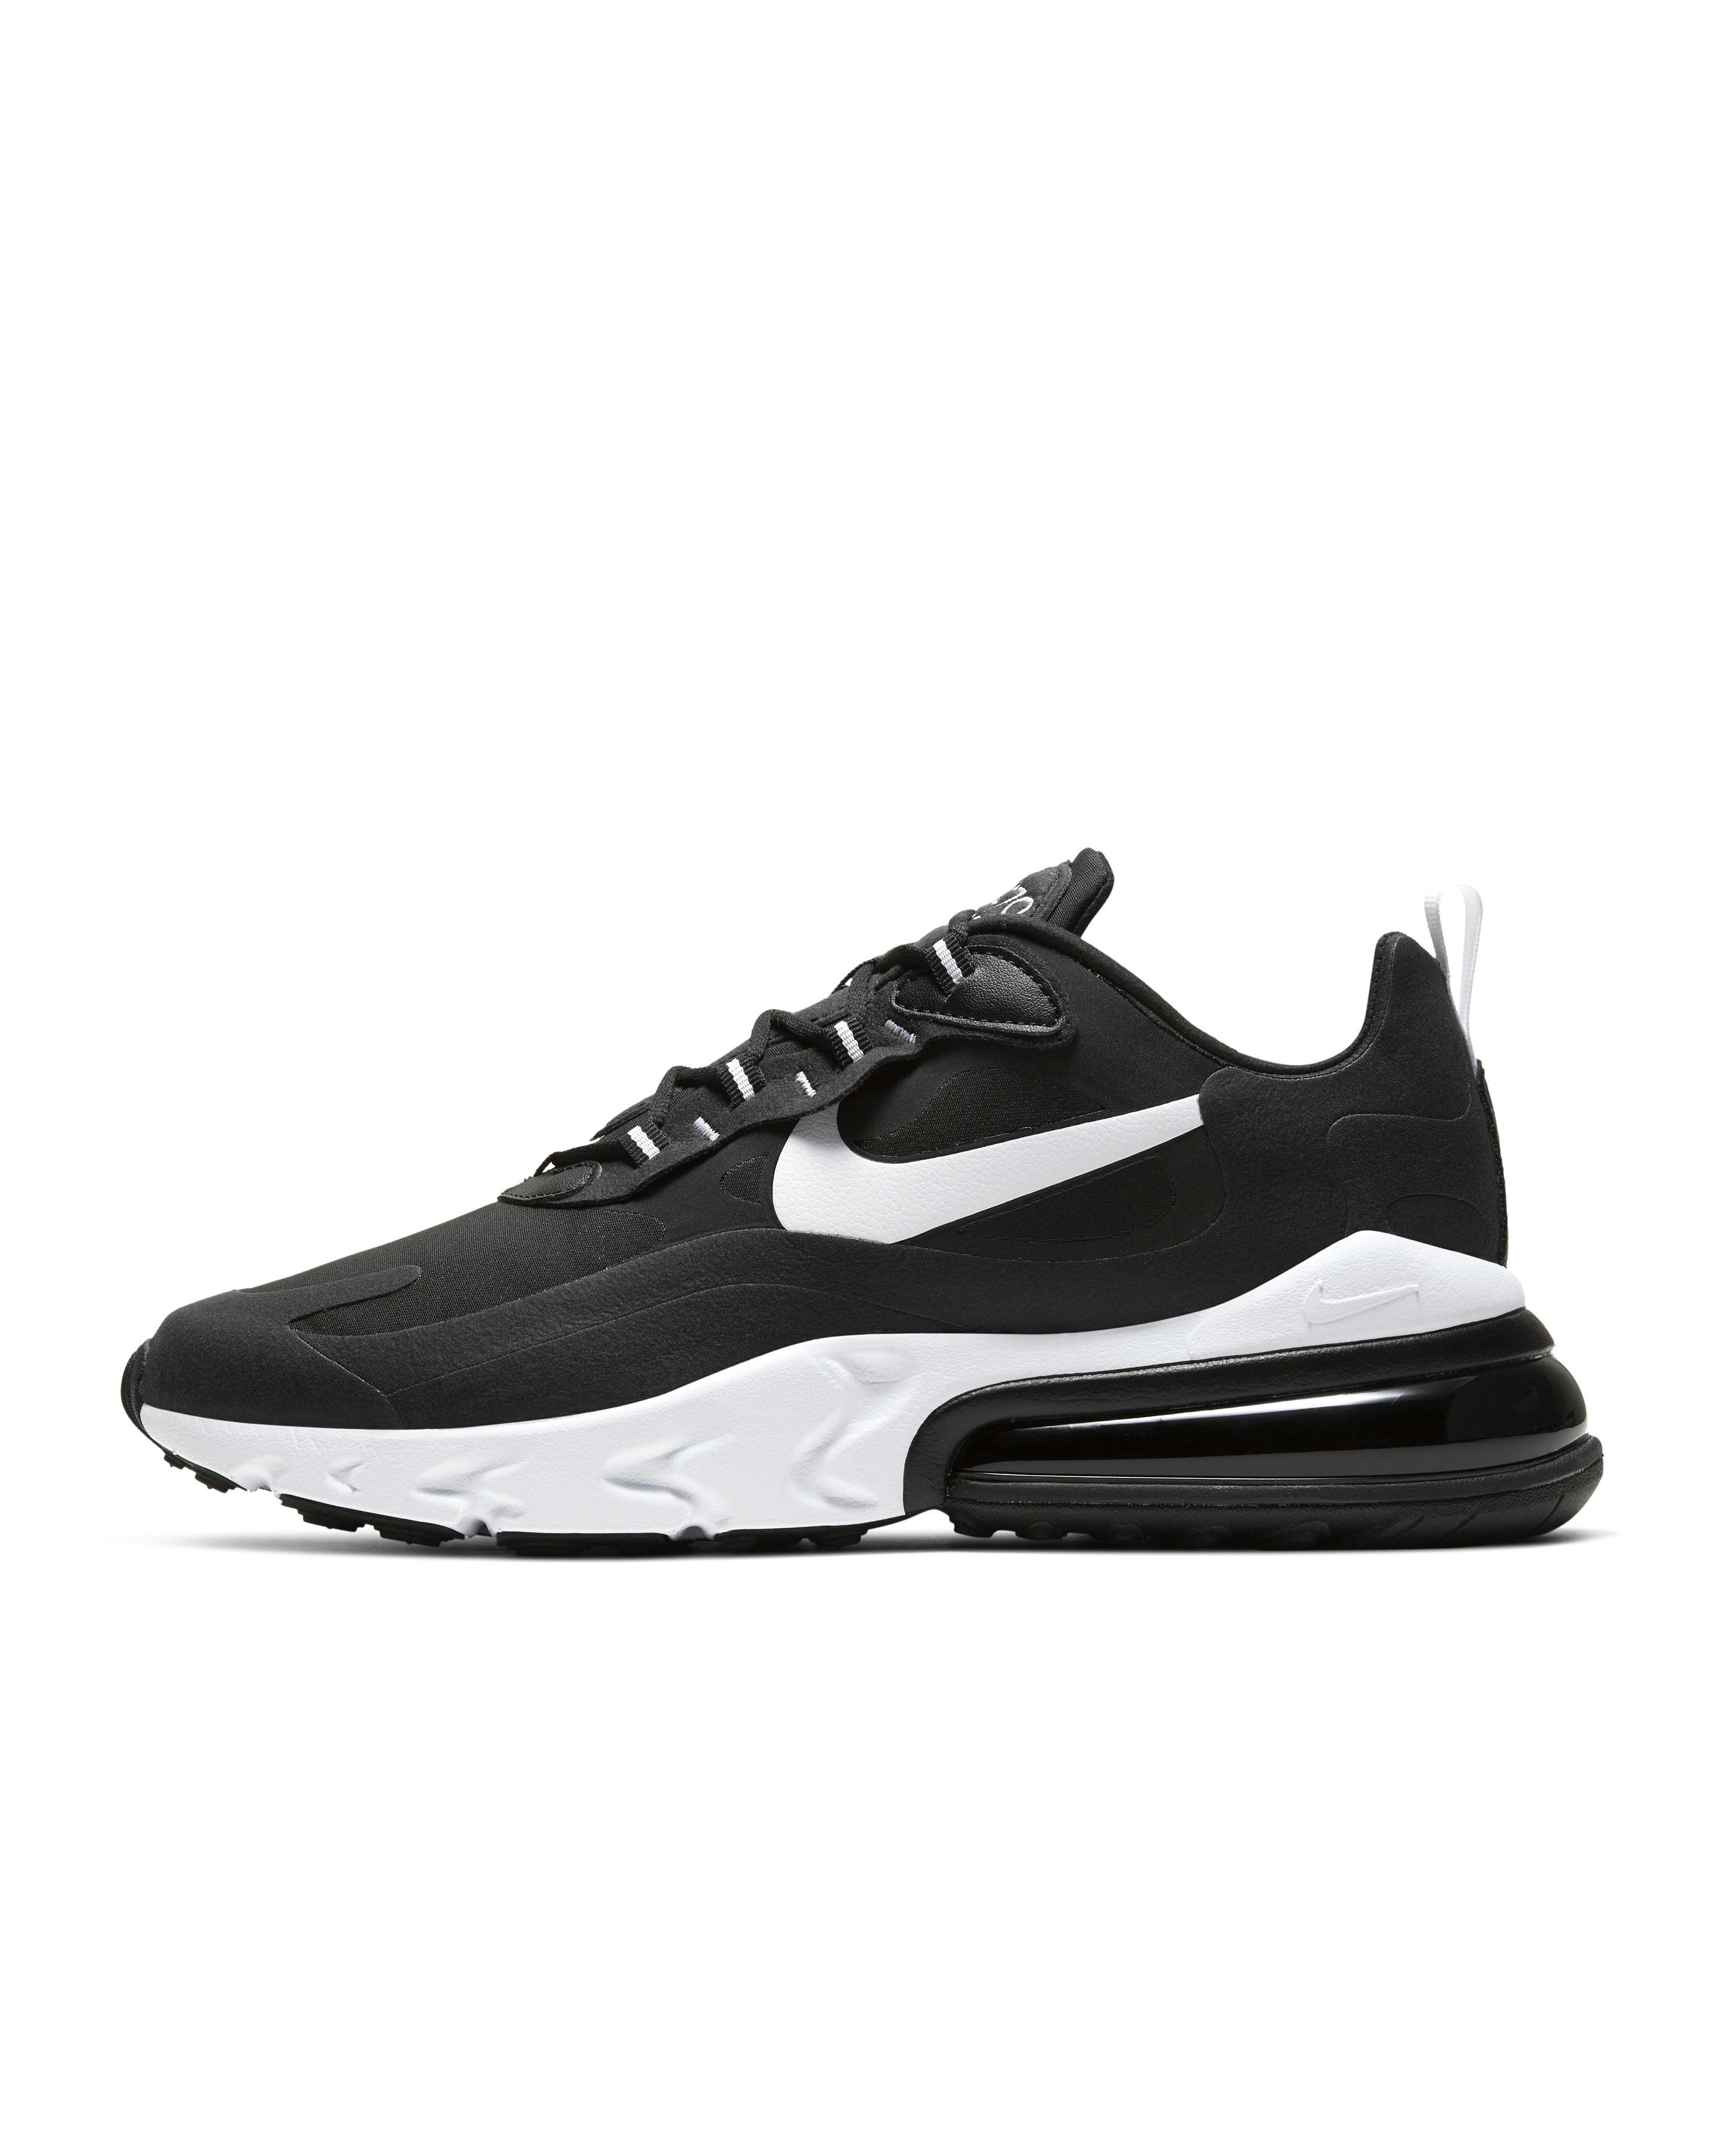 Best Nike Air Max Shoes 2021 | Air Max Releases and Deals